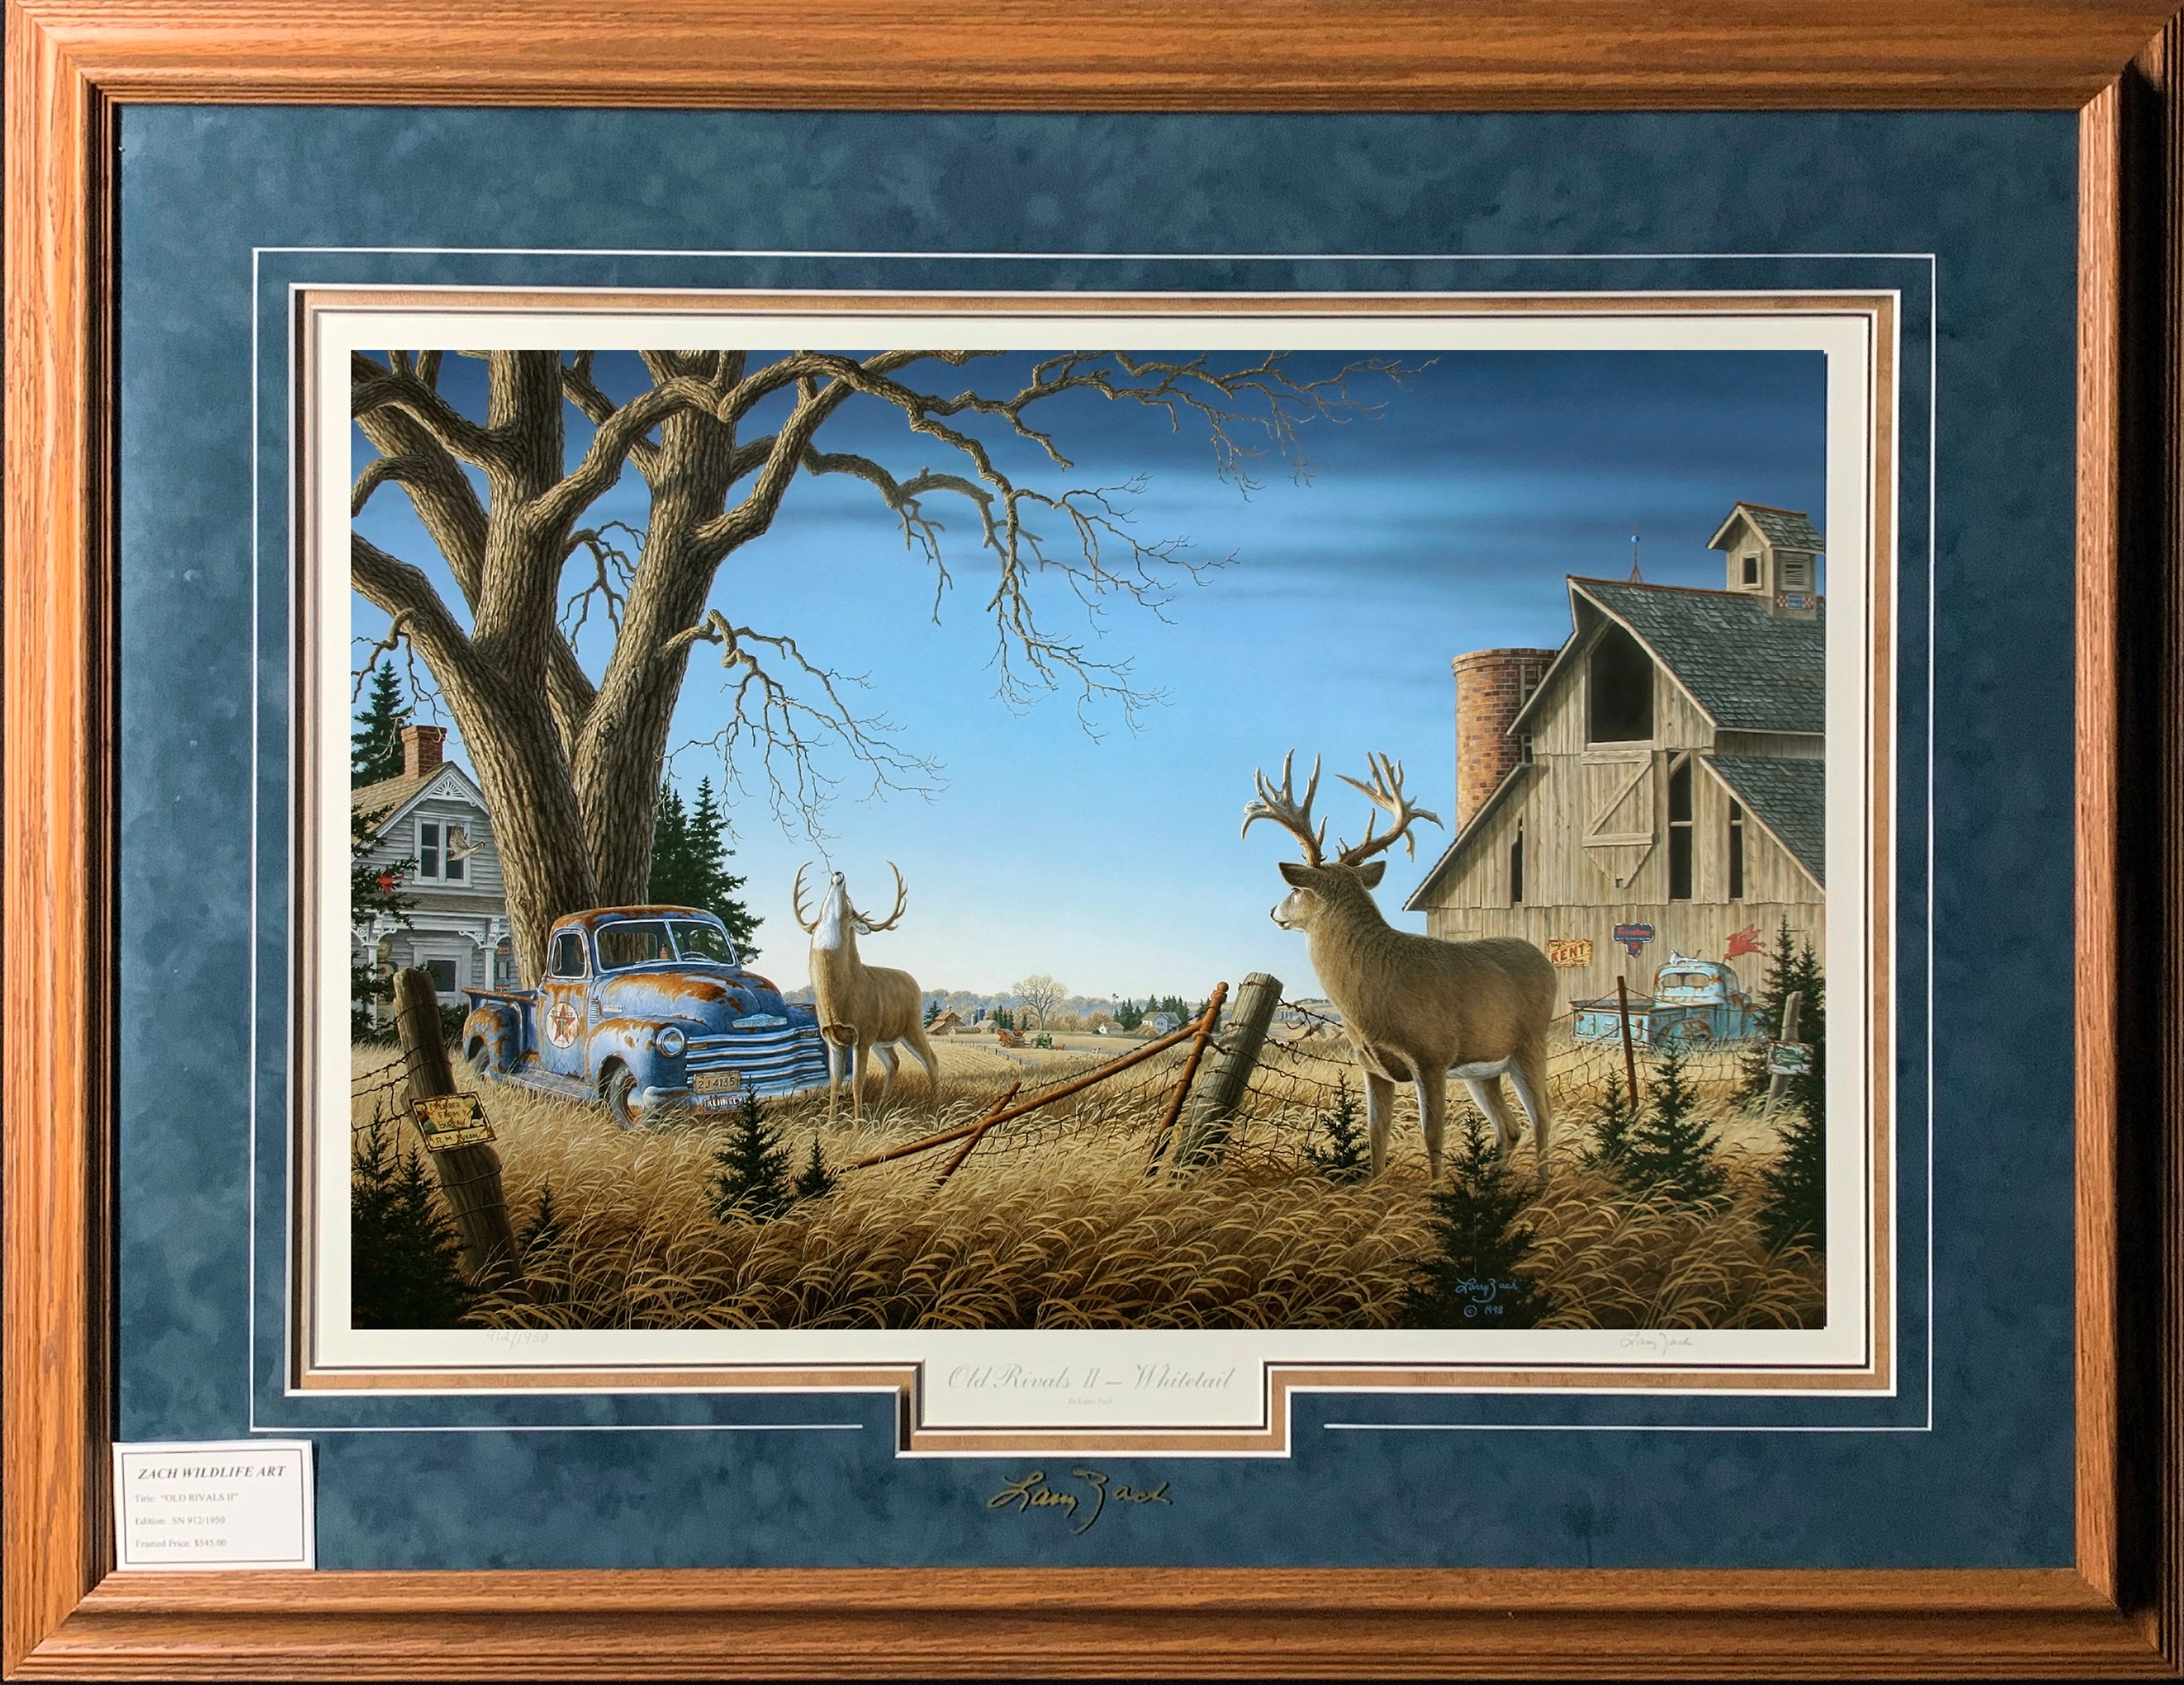 Secondary Market Limited Edition Paper #912 Framed